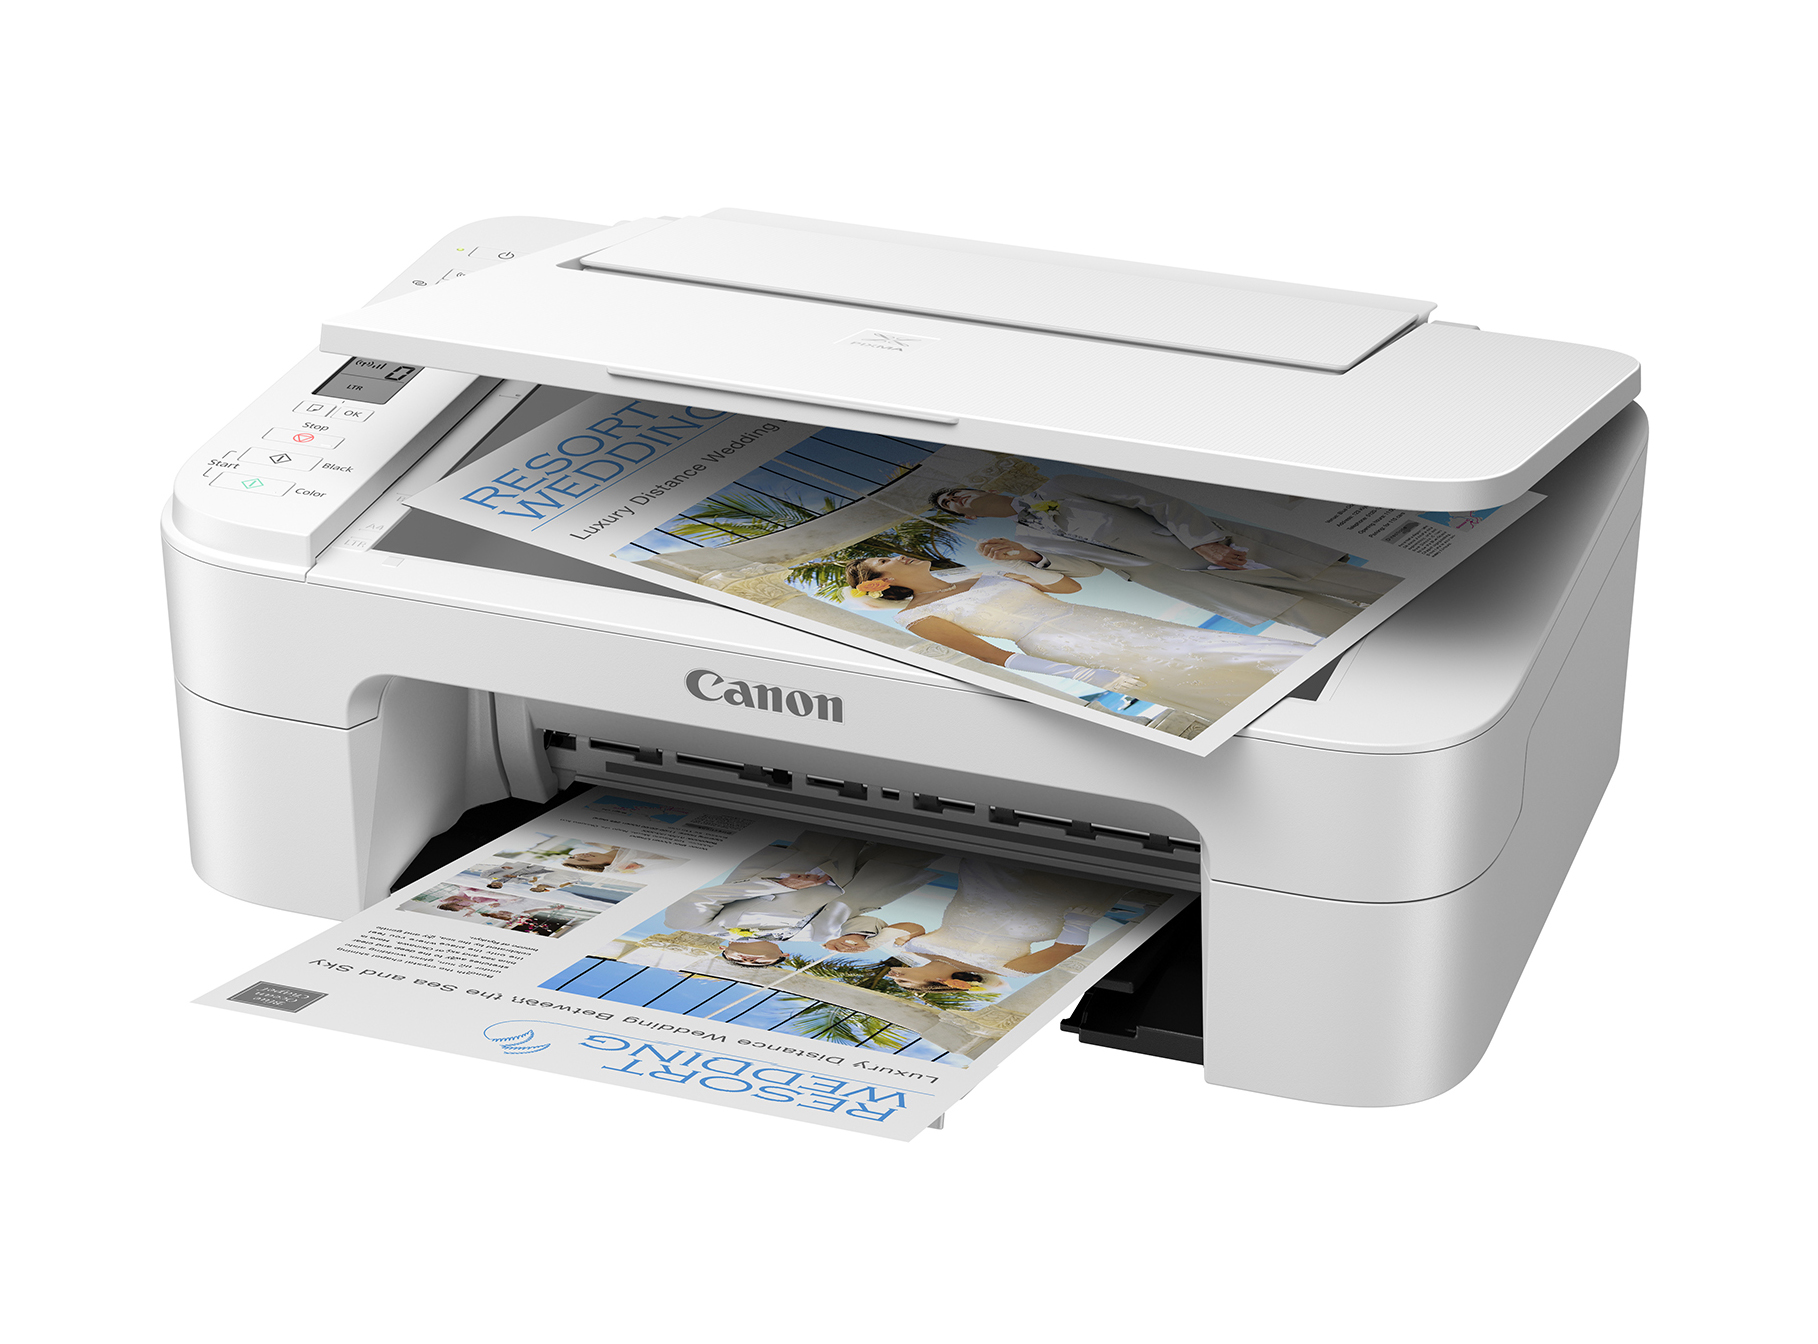 Canon TS3322 Wireless All In One Printer - image 4 of 4